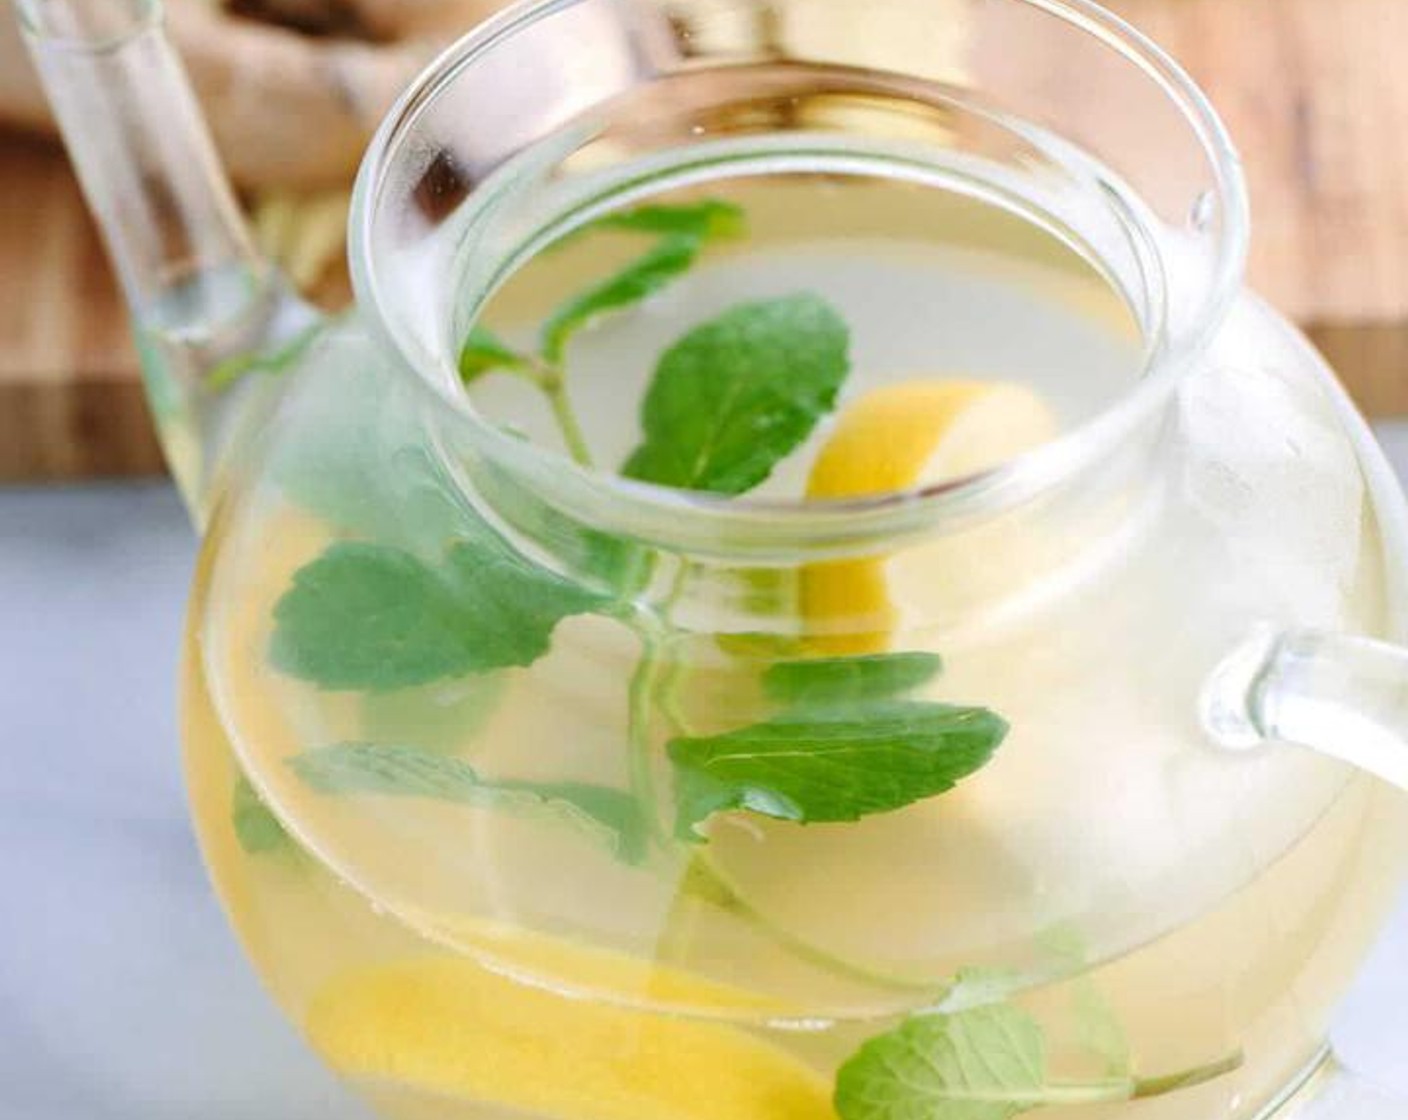 Ginger Root Tea with Lemon and Mint